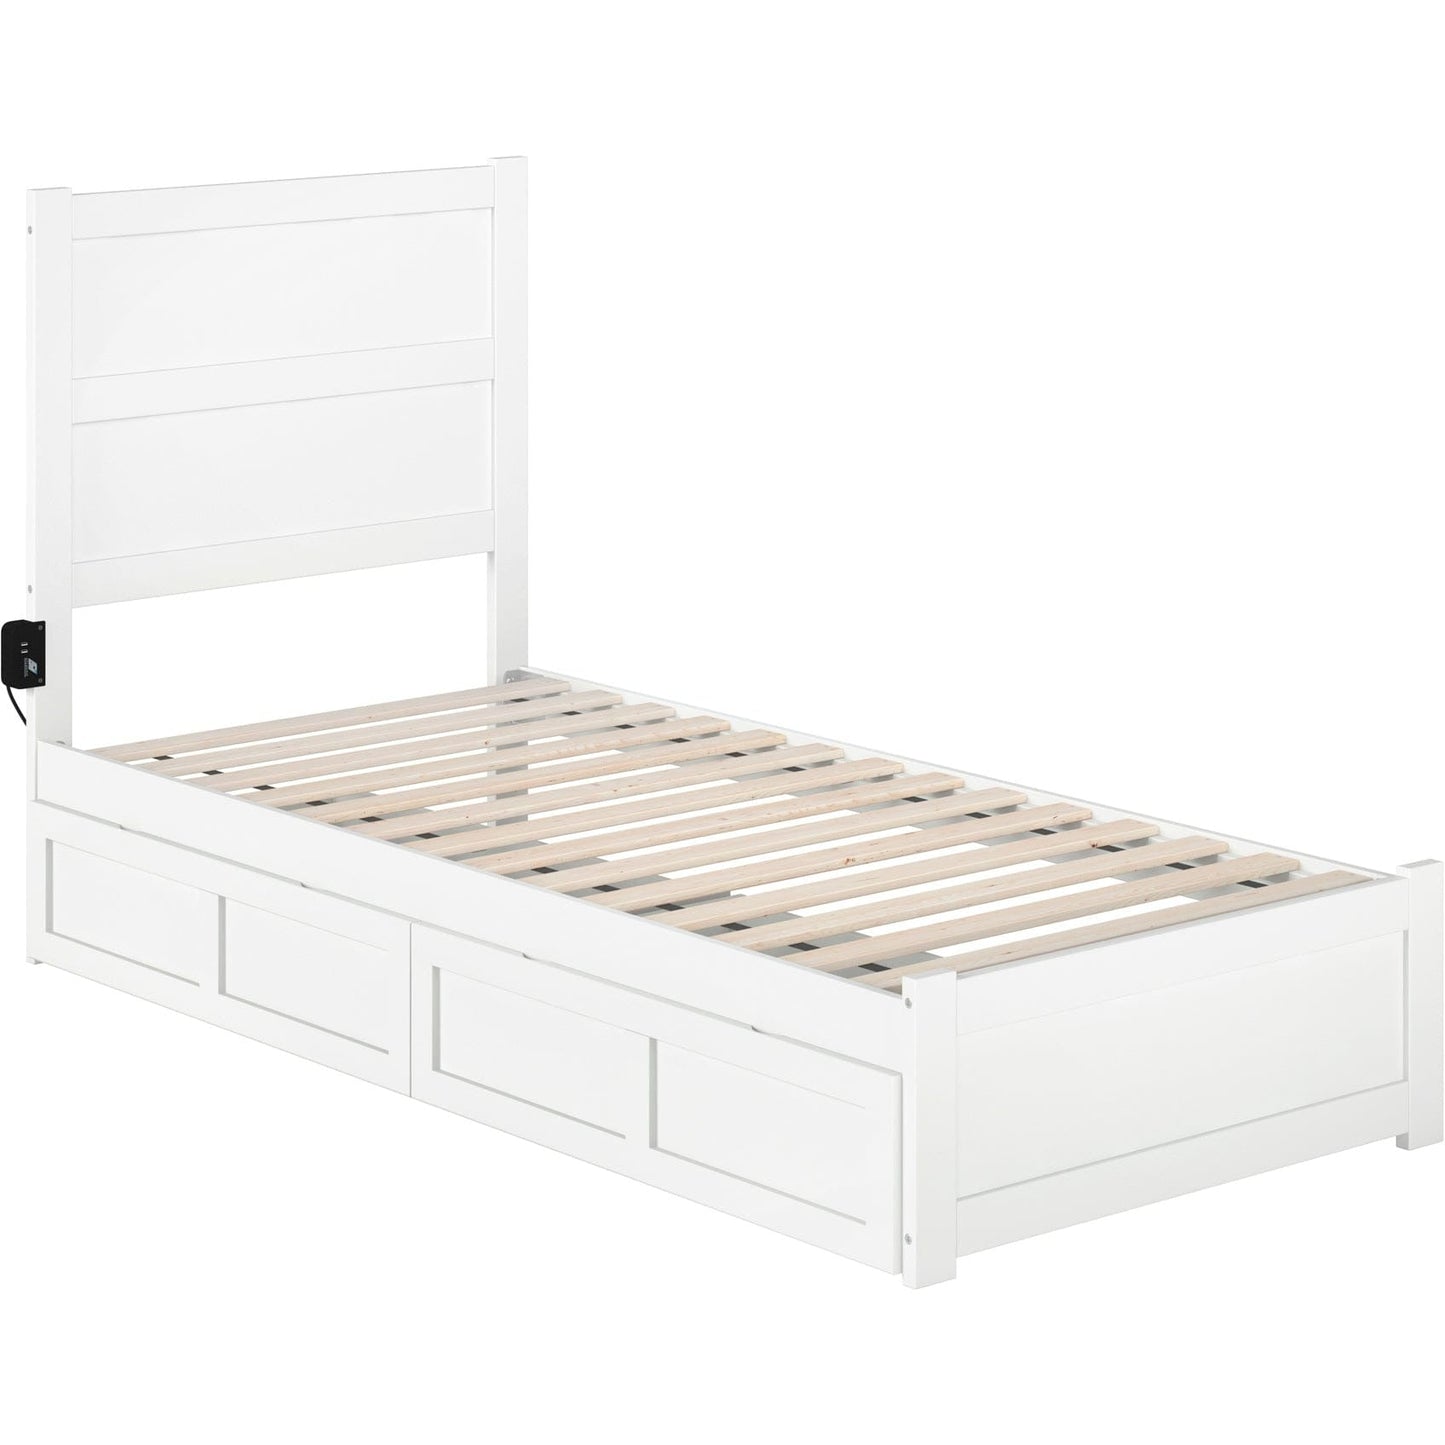 AFI Furnishings NoHo Twin Extra Long Bed with Footboard and 2 Drawers in White AG9163412